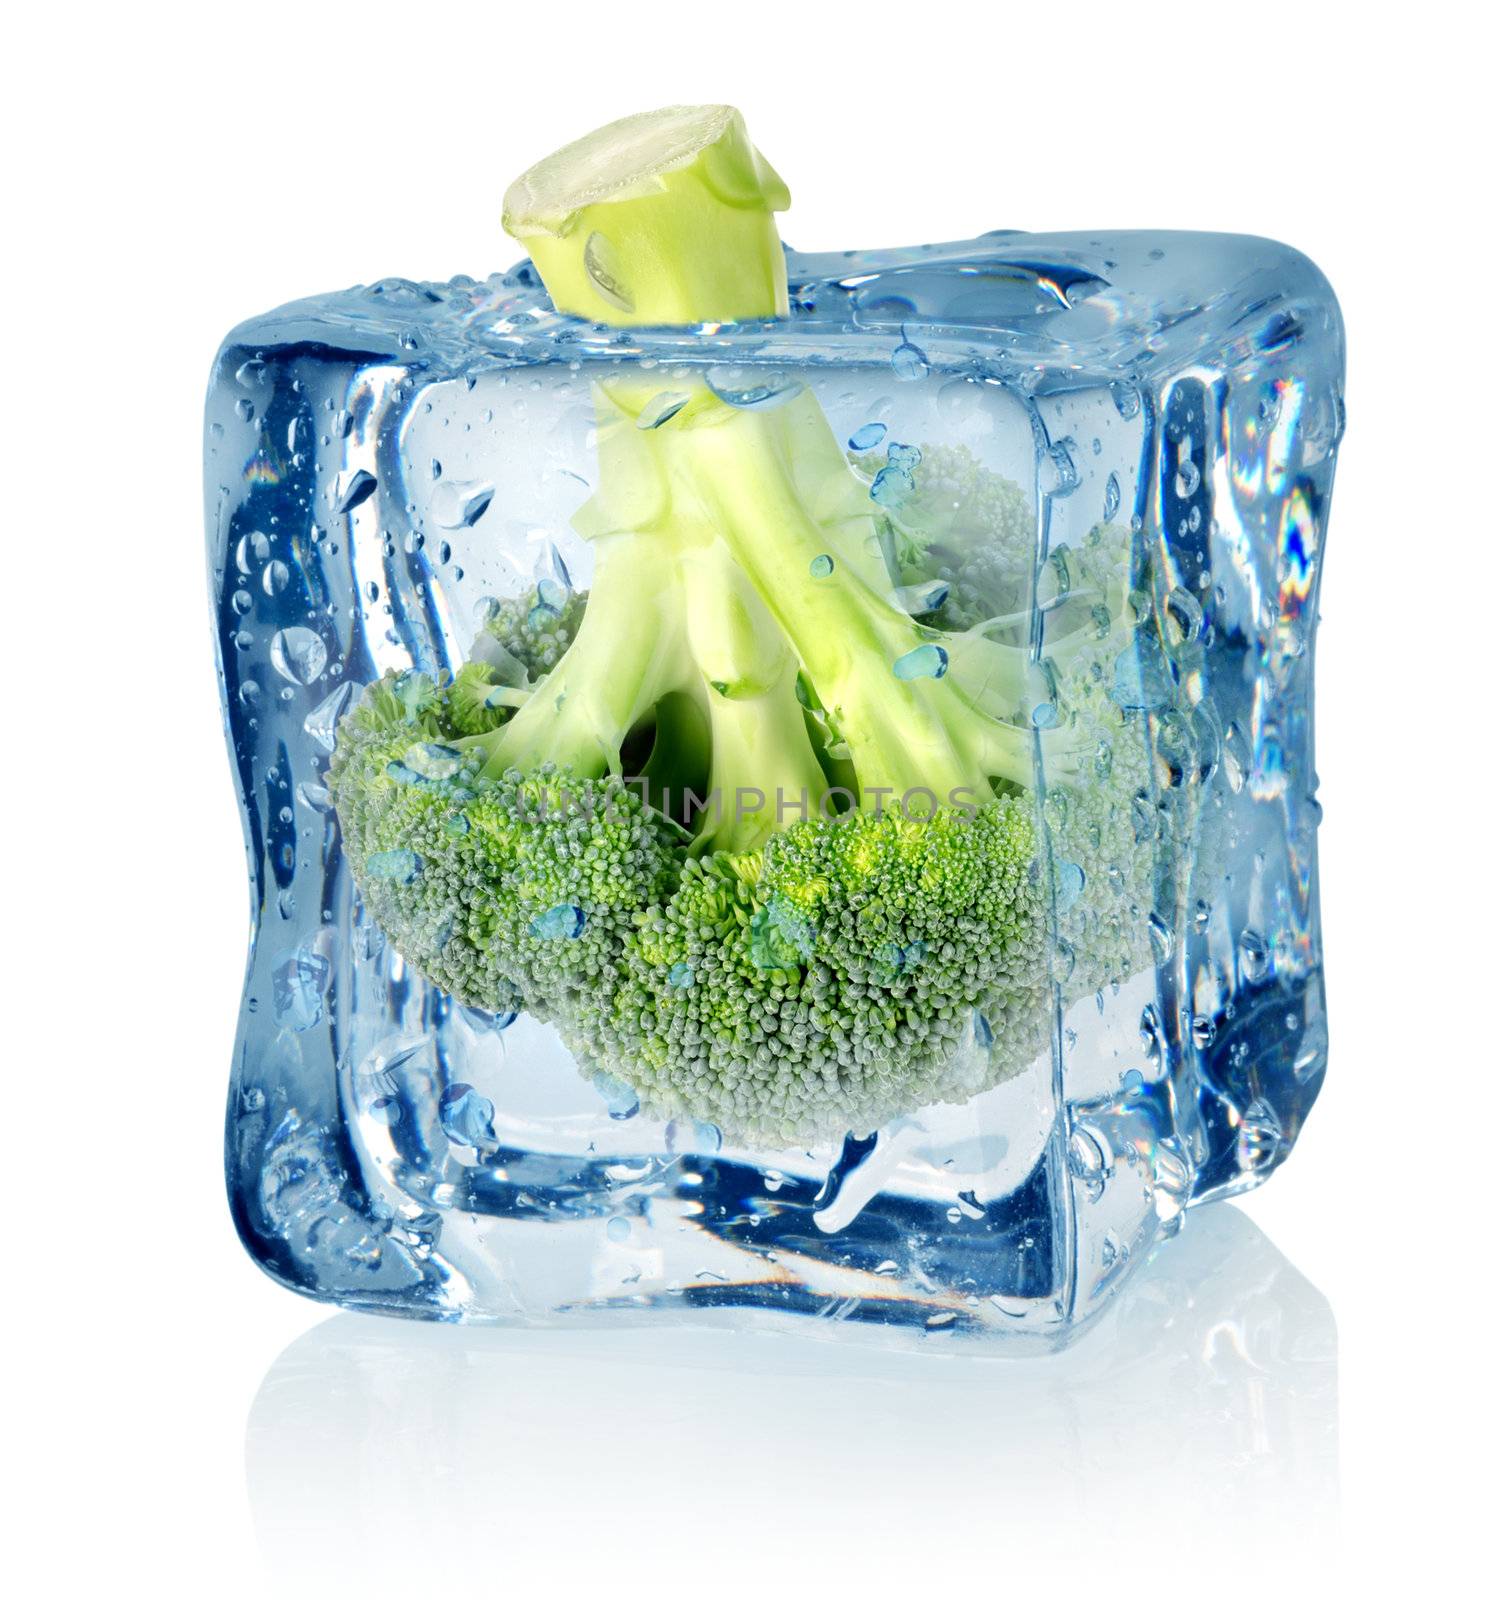 Broccoli in ice isolated on a white background